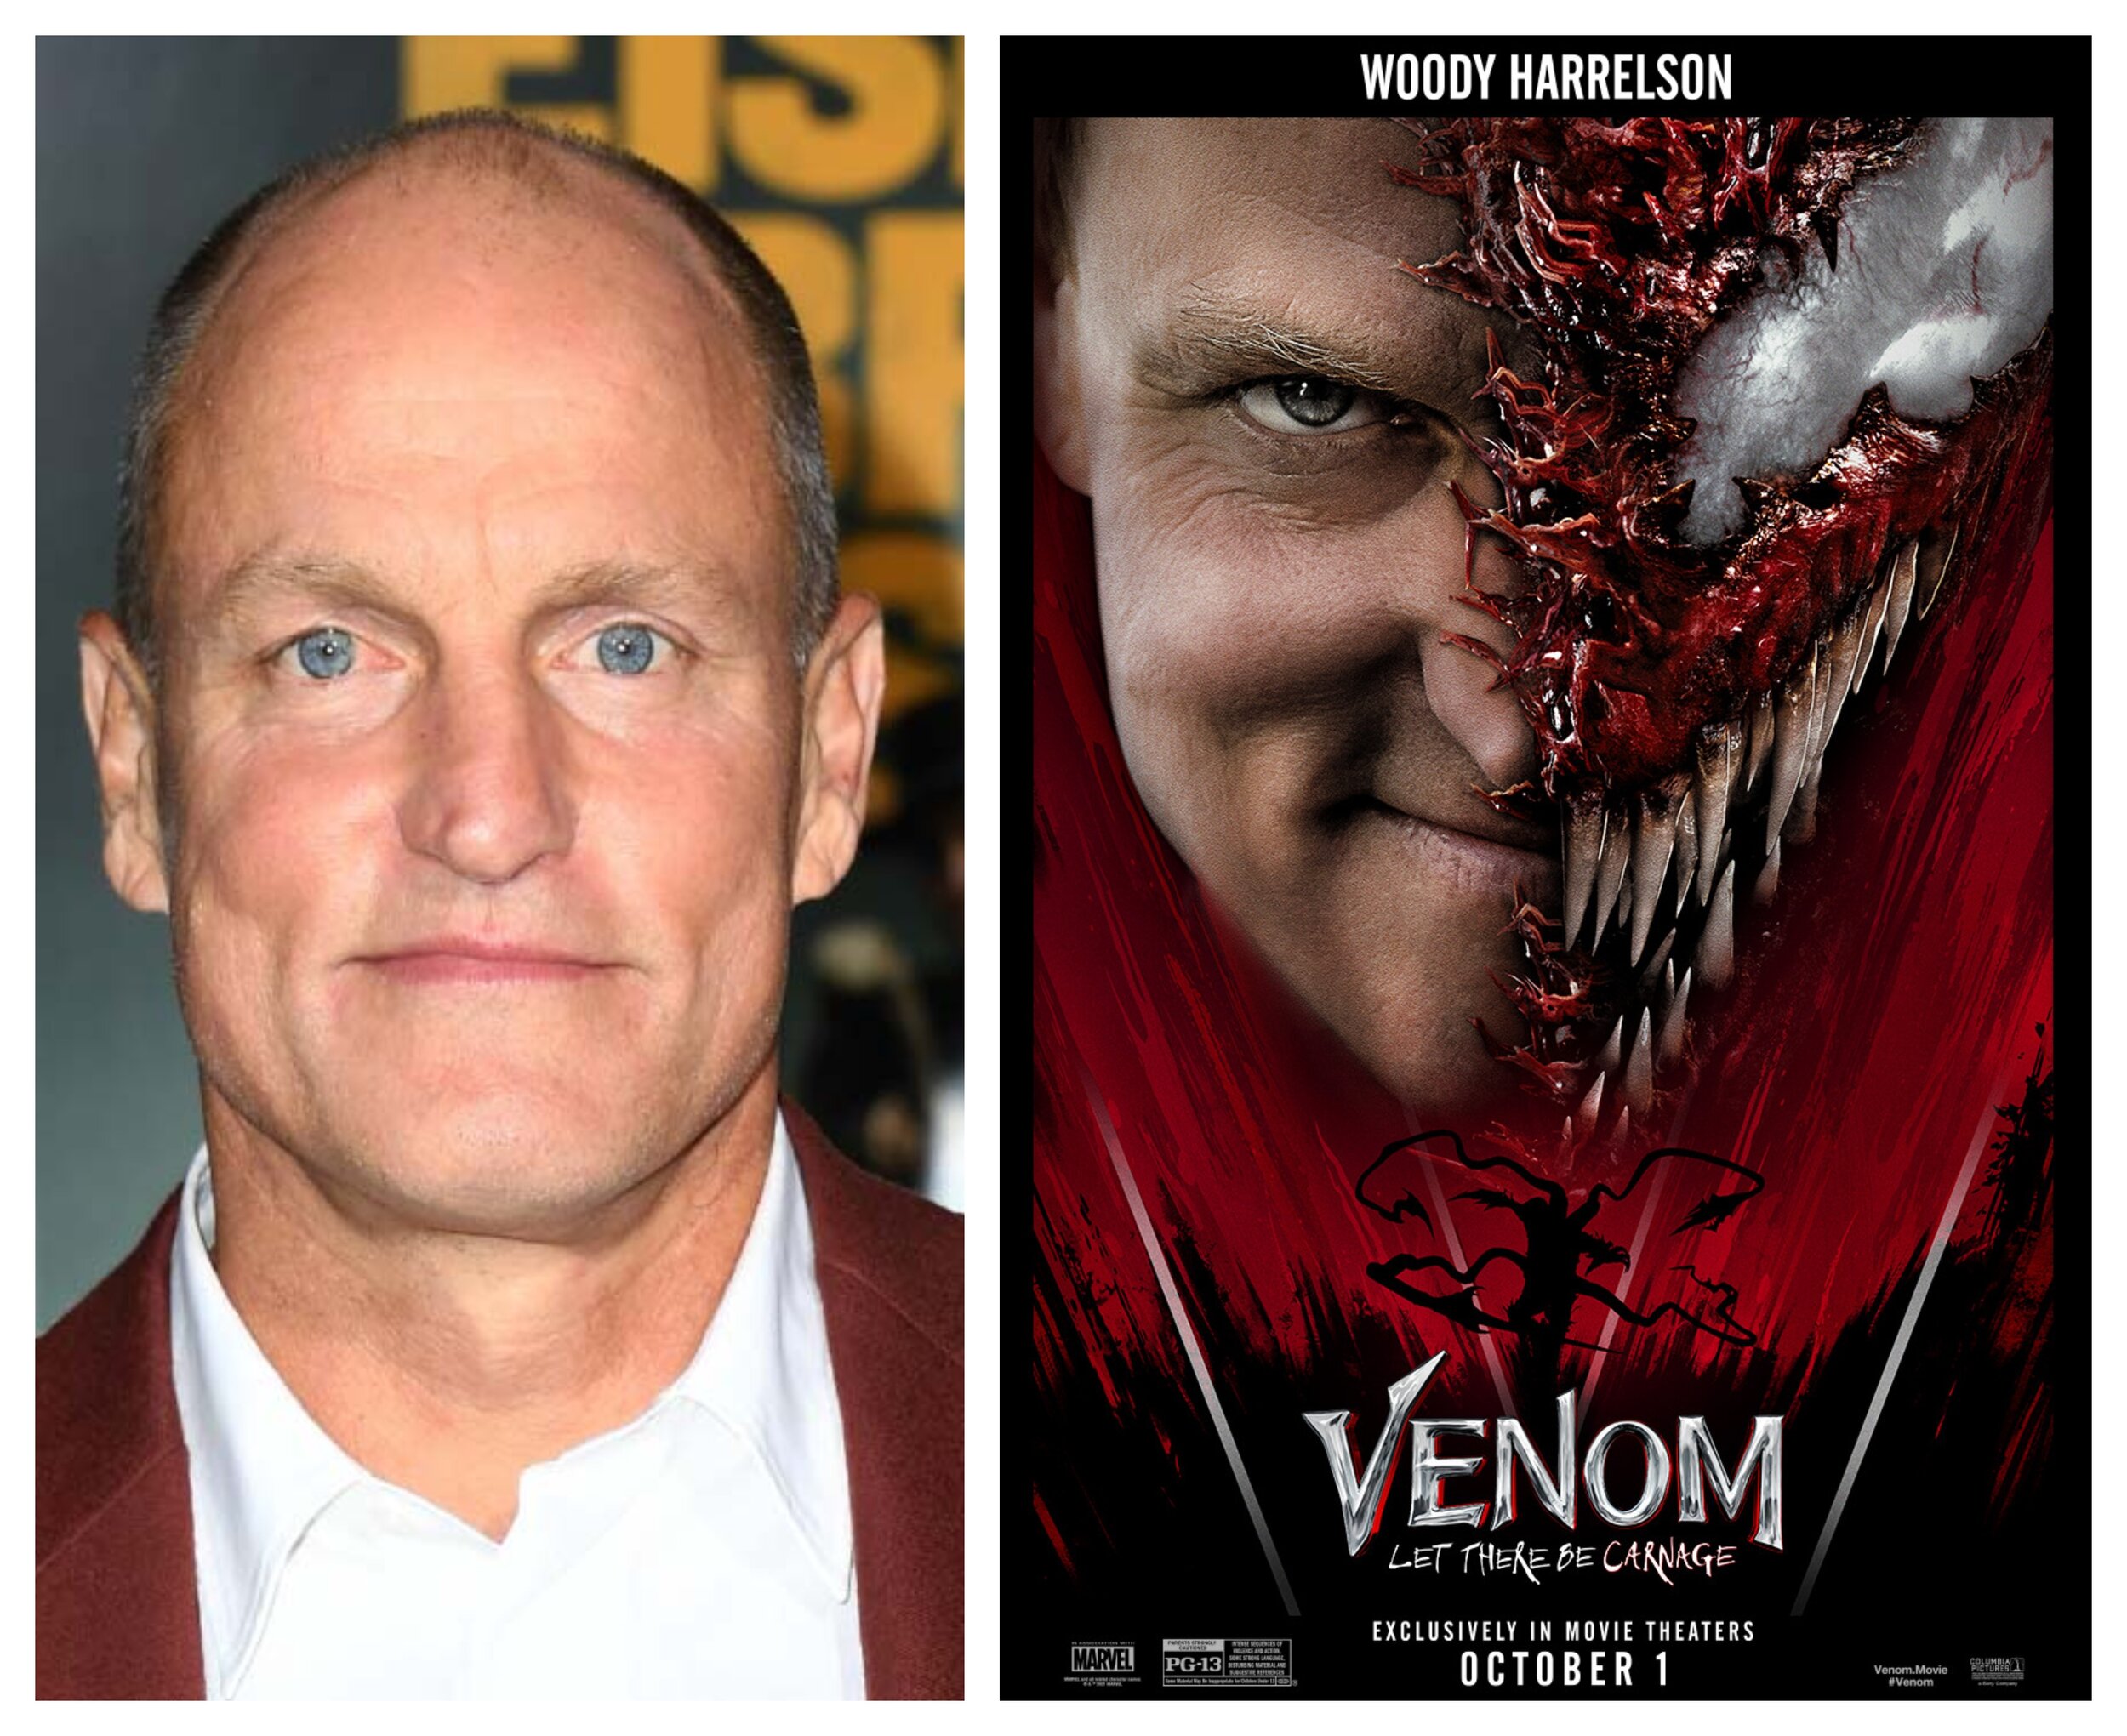 Exclusive: Woody Harrelson on playing Carnage in Venom Let There Be Carnage  and working with Andy Serkis again — BlackFilmandTV.com